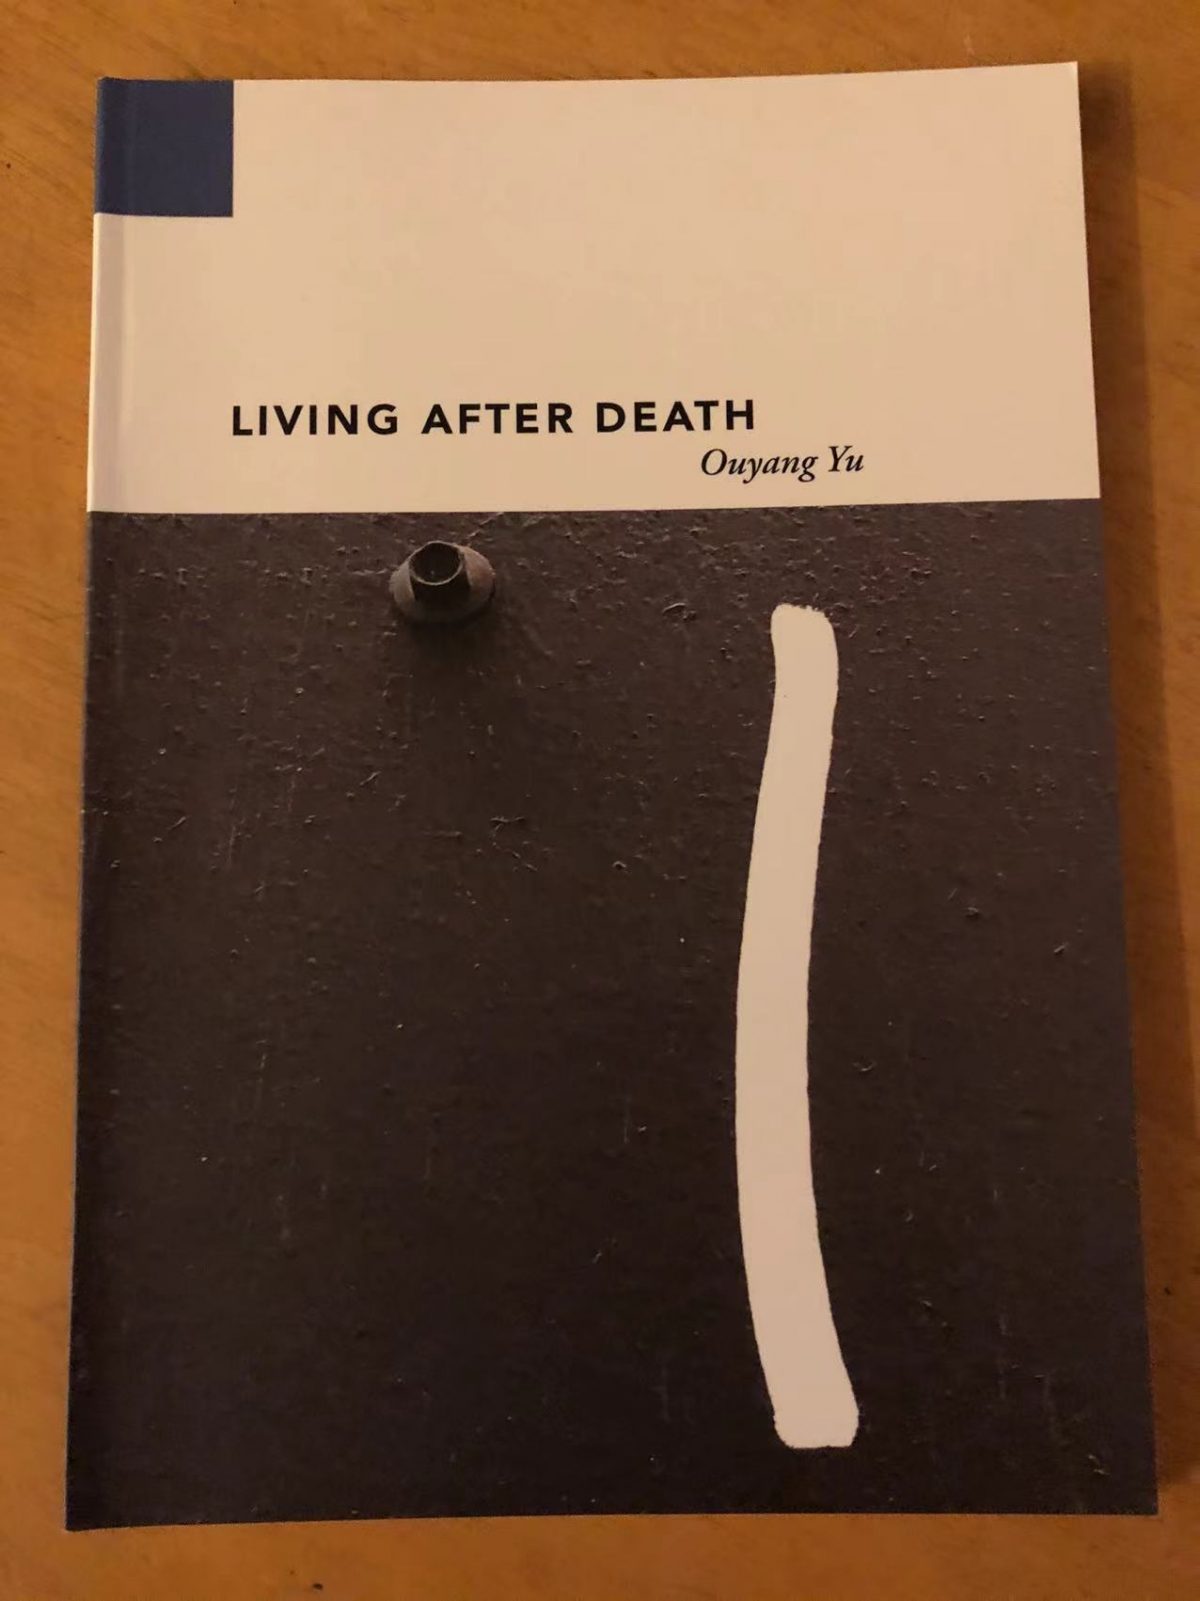 Living After Death, a collection of prose poetry